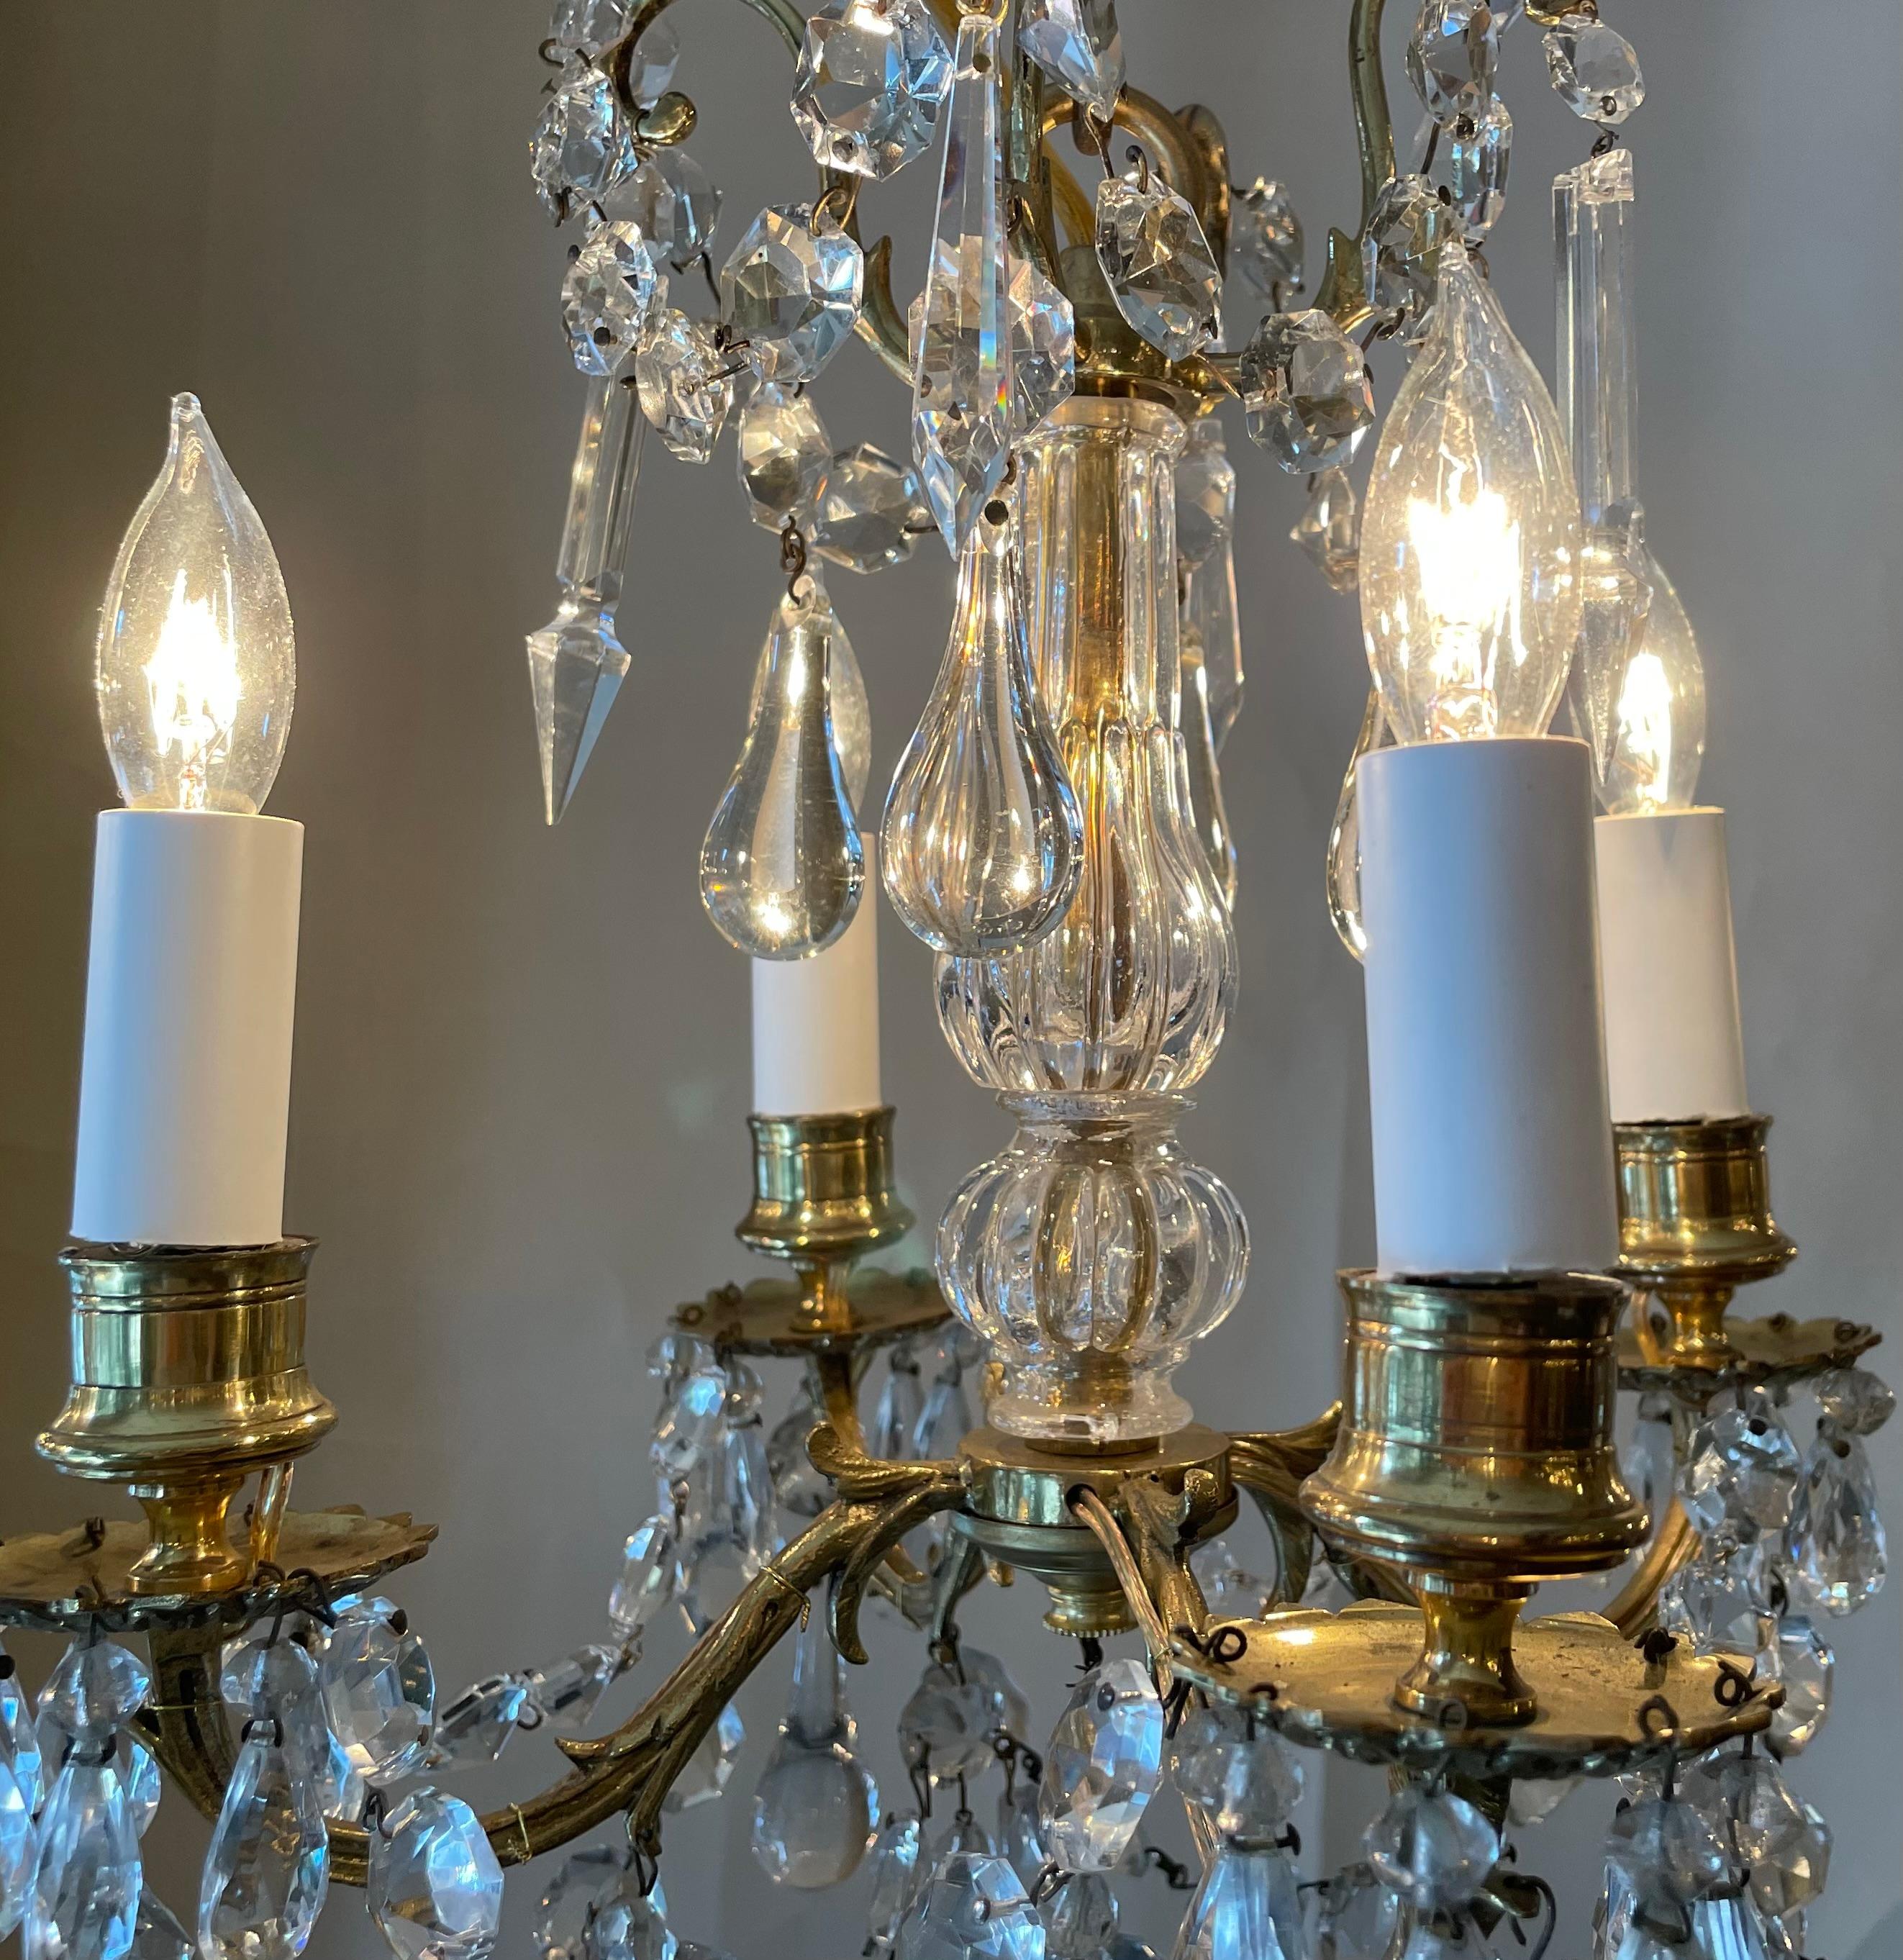 Antique Charming French Crystal and Bronze Chandelier, circa 1890-1900. There is a second identical chandelier available. 